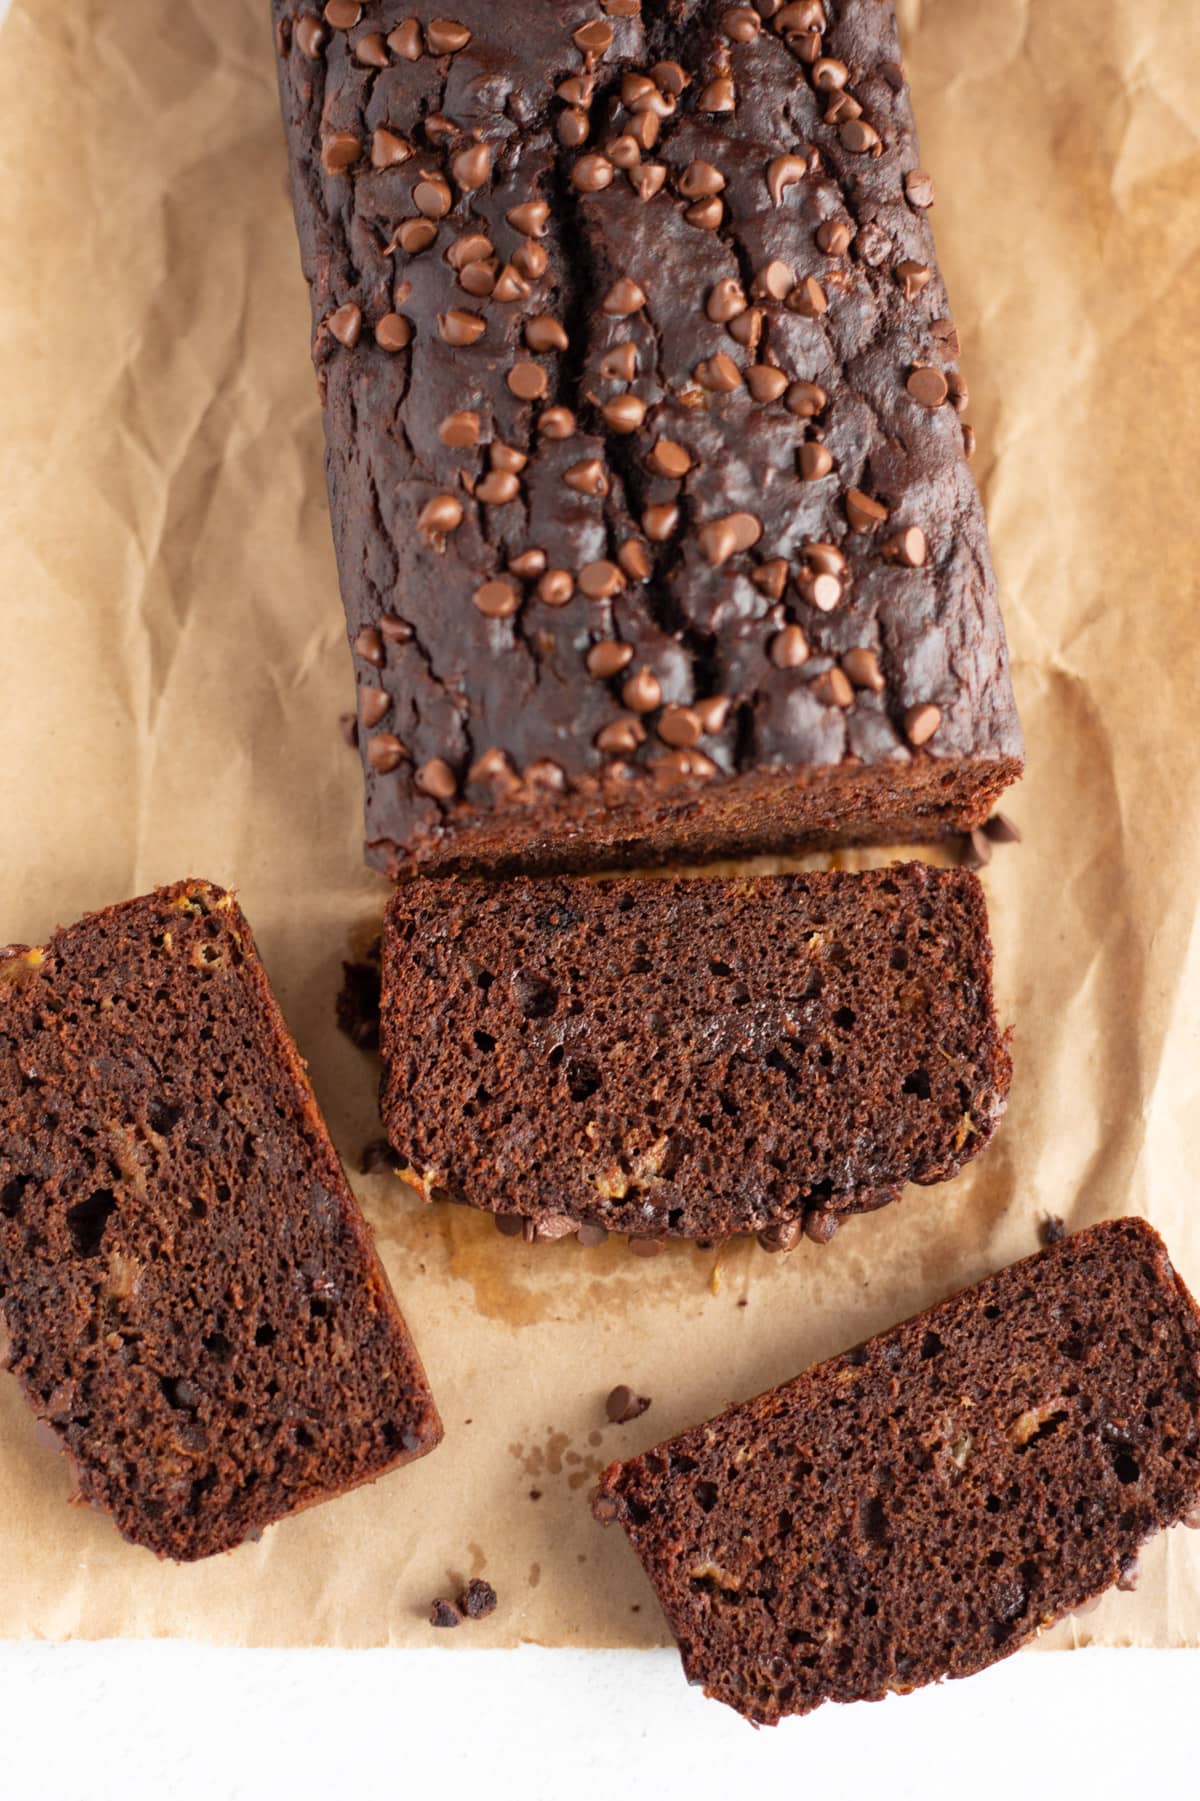 3 slices of chocolate banana loaf